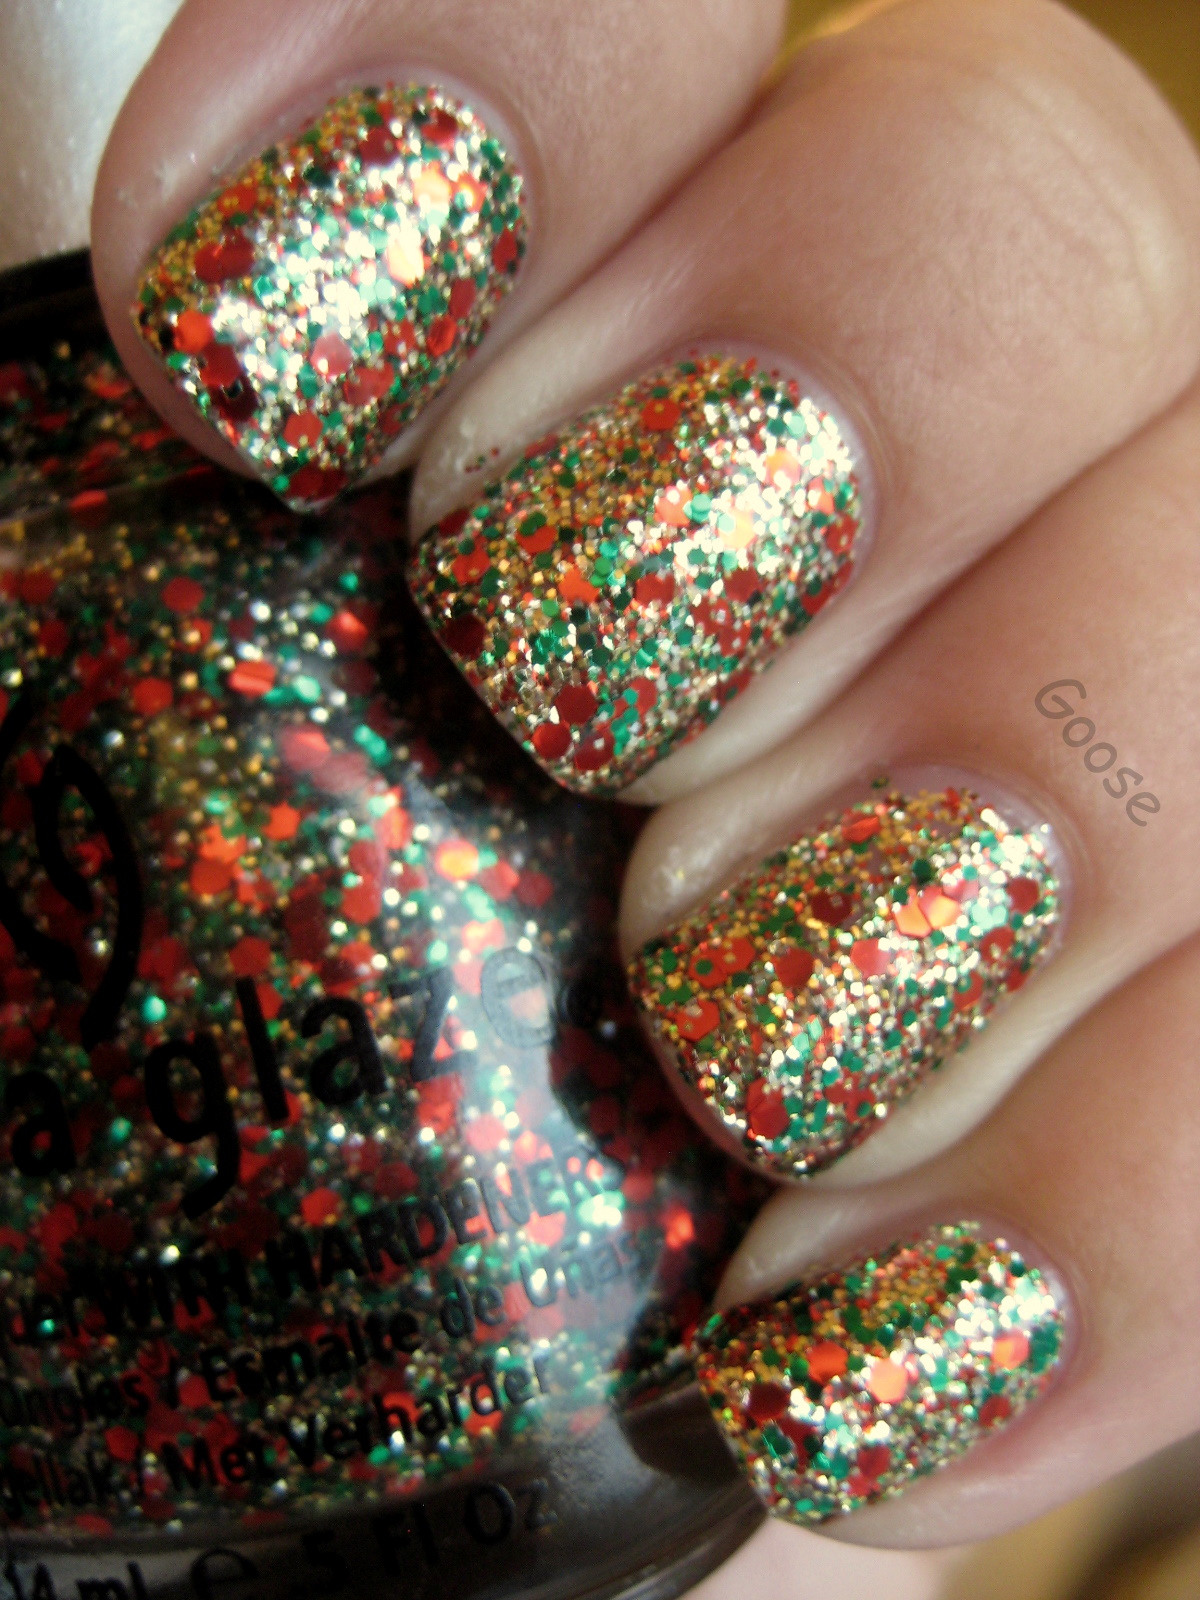 Goose's Glitter: The 12 Days of Christmas Nails: Day 8 - Christmas Glitter